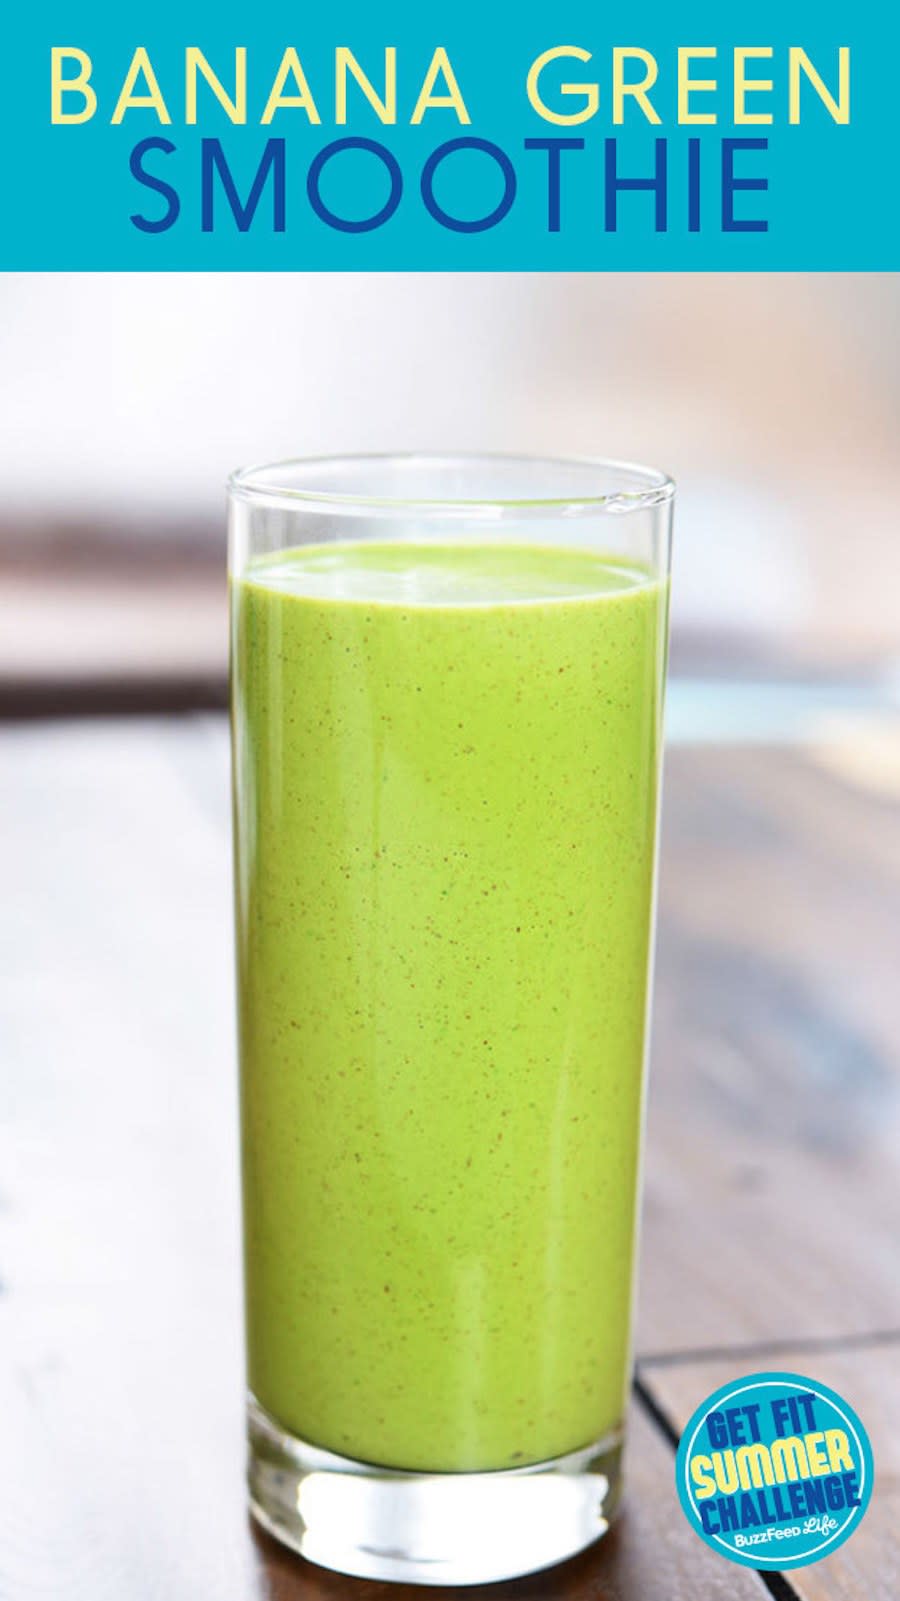 Banana Green Smoothie from BuzzFeed Food